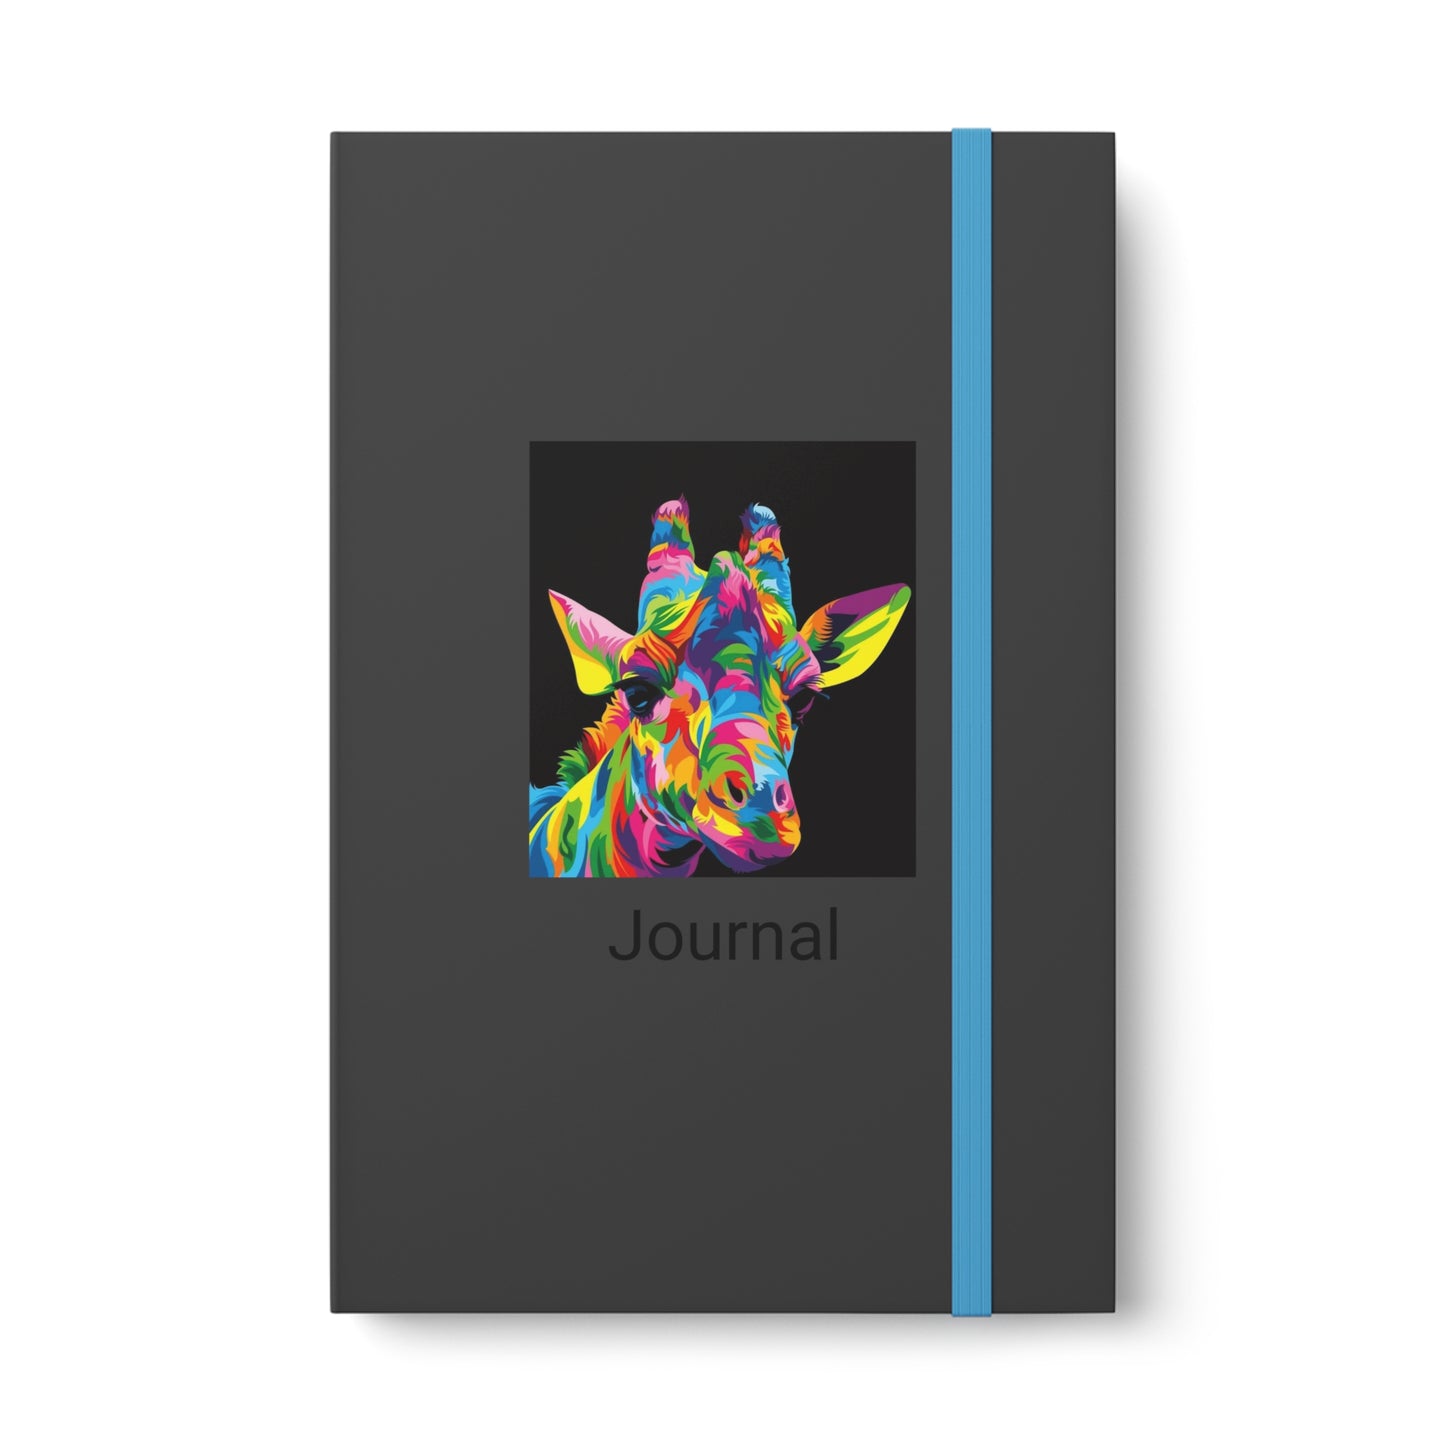 "Be Bold" Color Contrast Notebook with Multicolored Giraffe -  Ruled pages with Artwork and design by African Artist Wambi Joseph